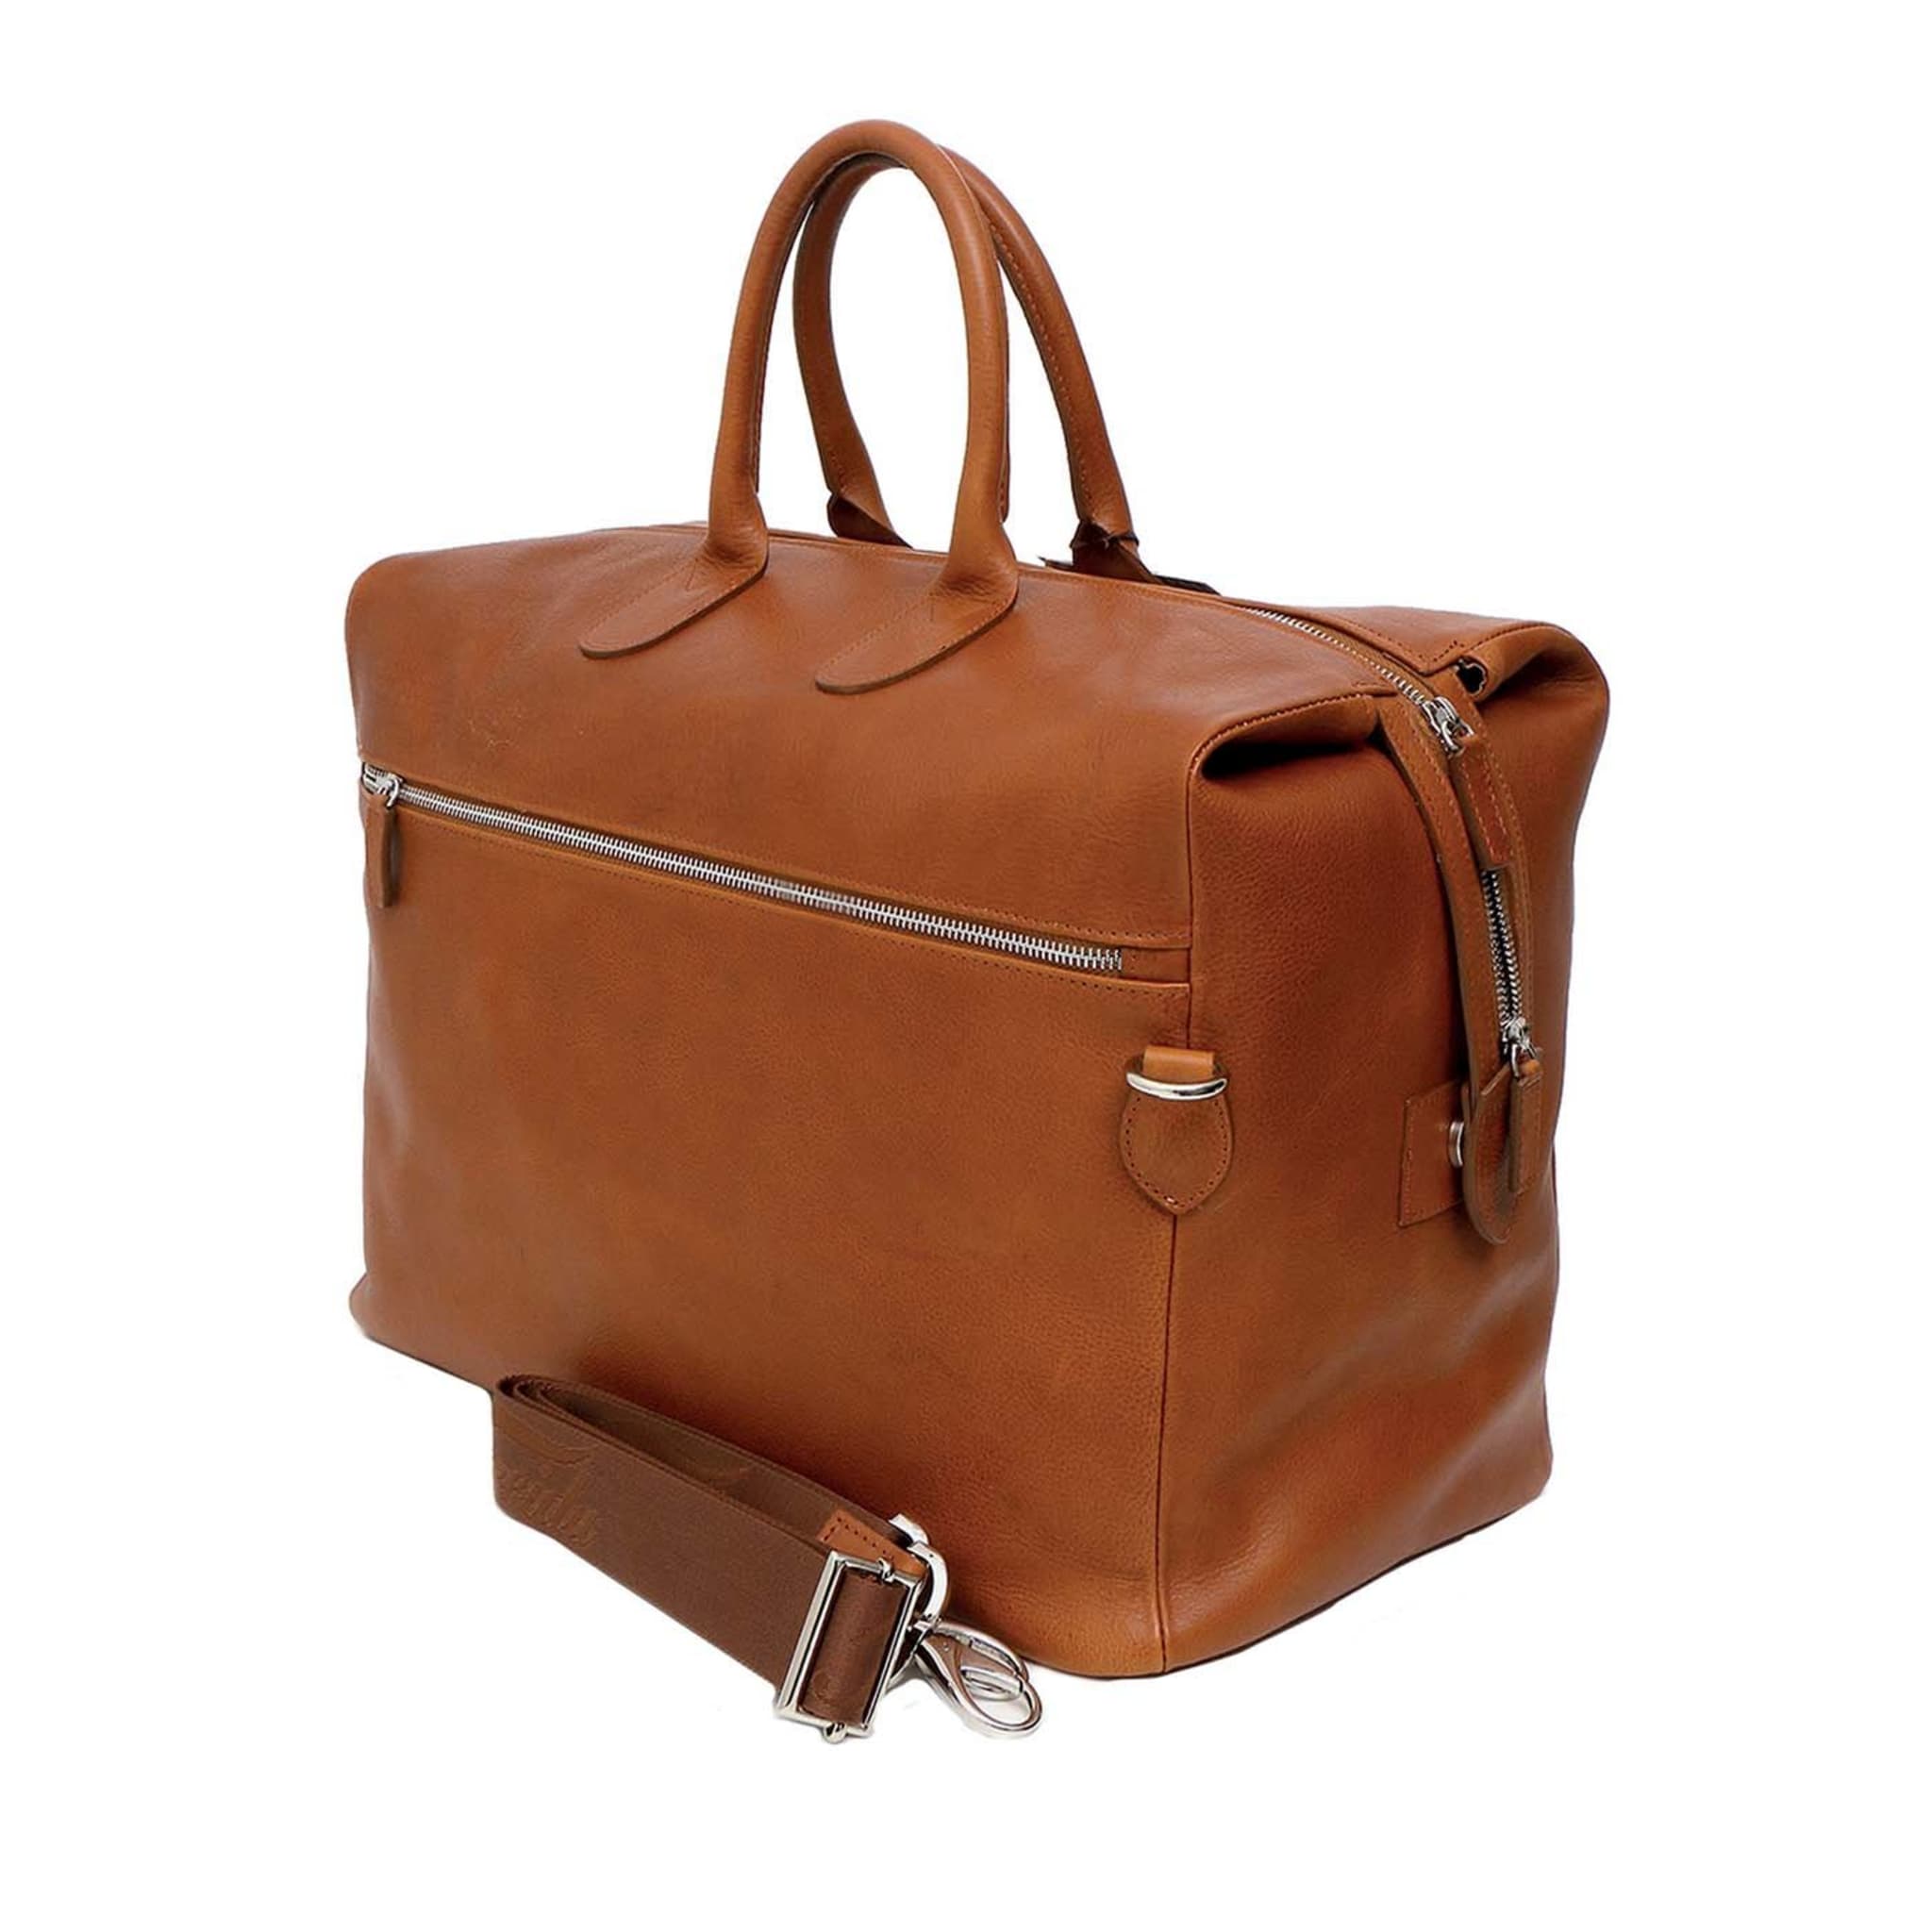 Brown Leather Travel Bag - Main view